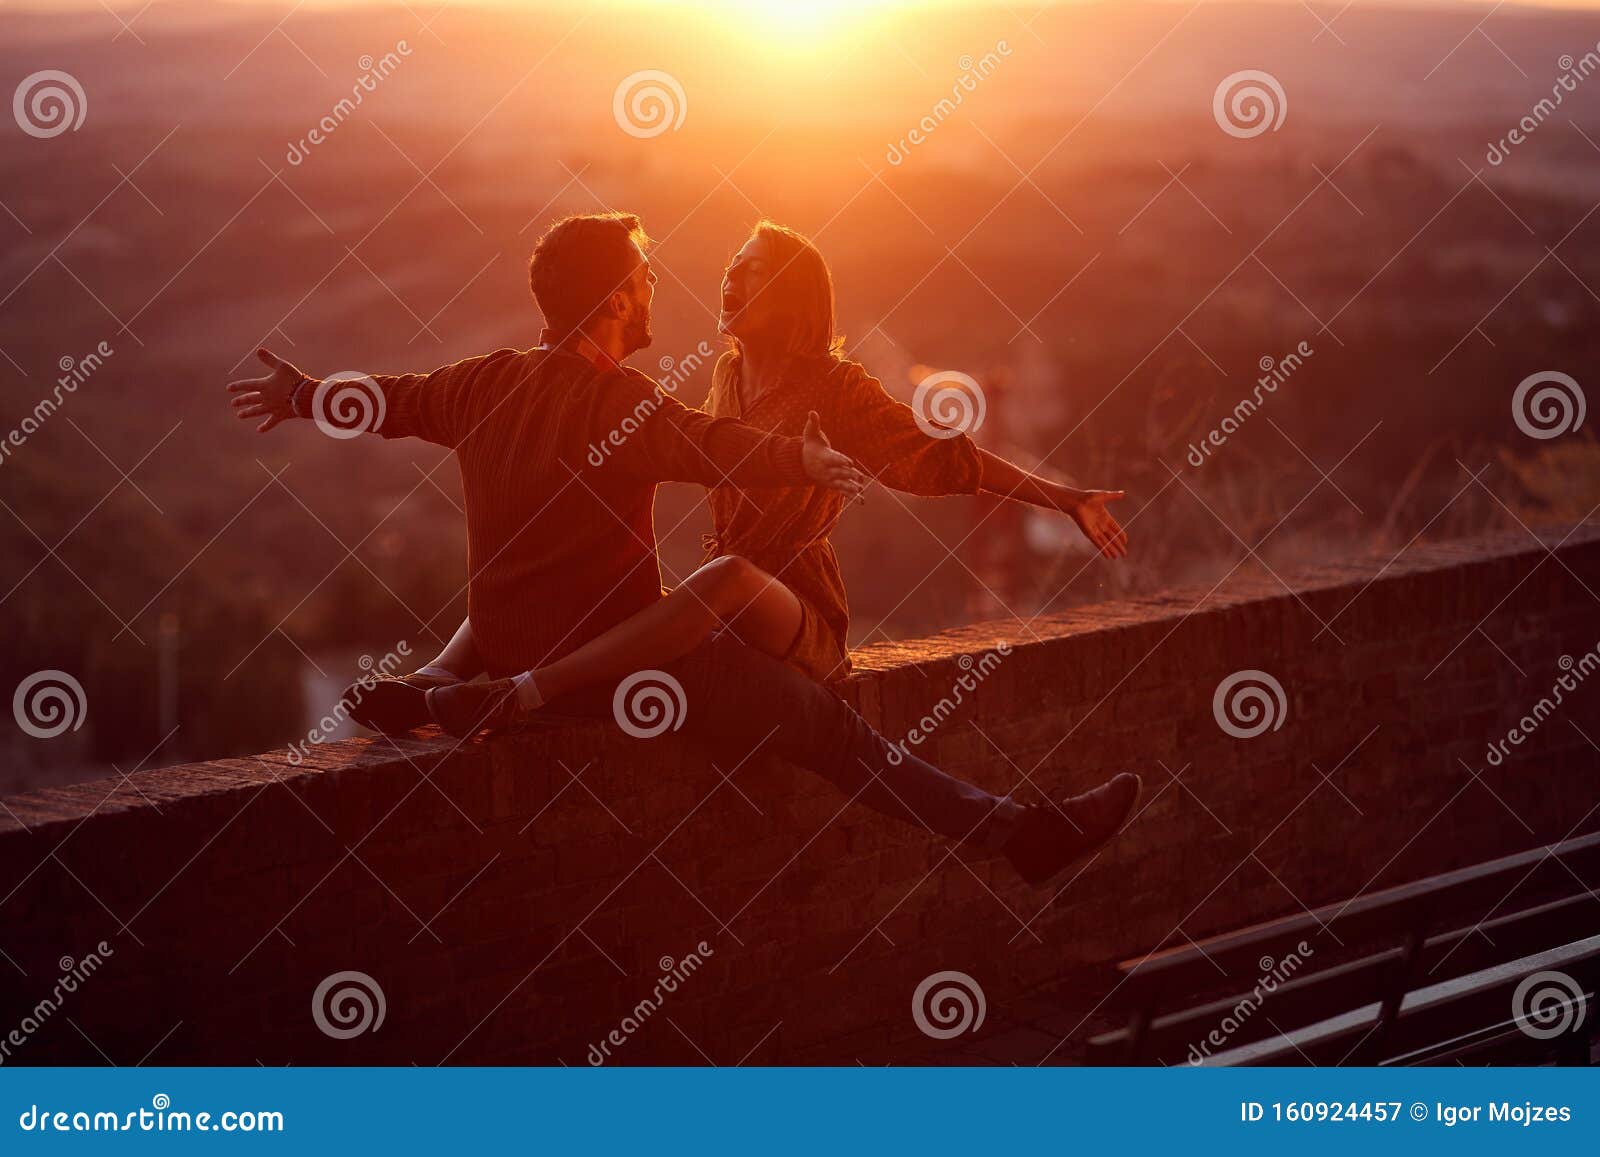 lovers. romantic at sunset. man and woman smiling and enjoying together